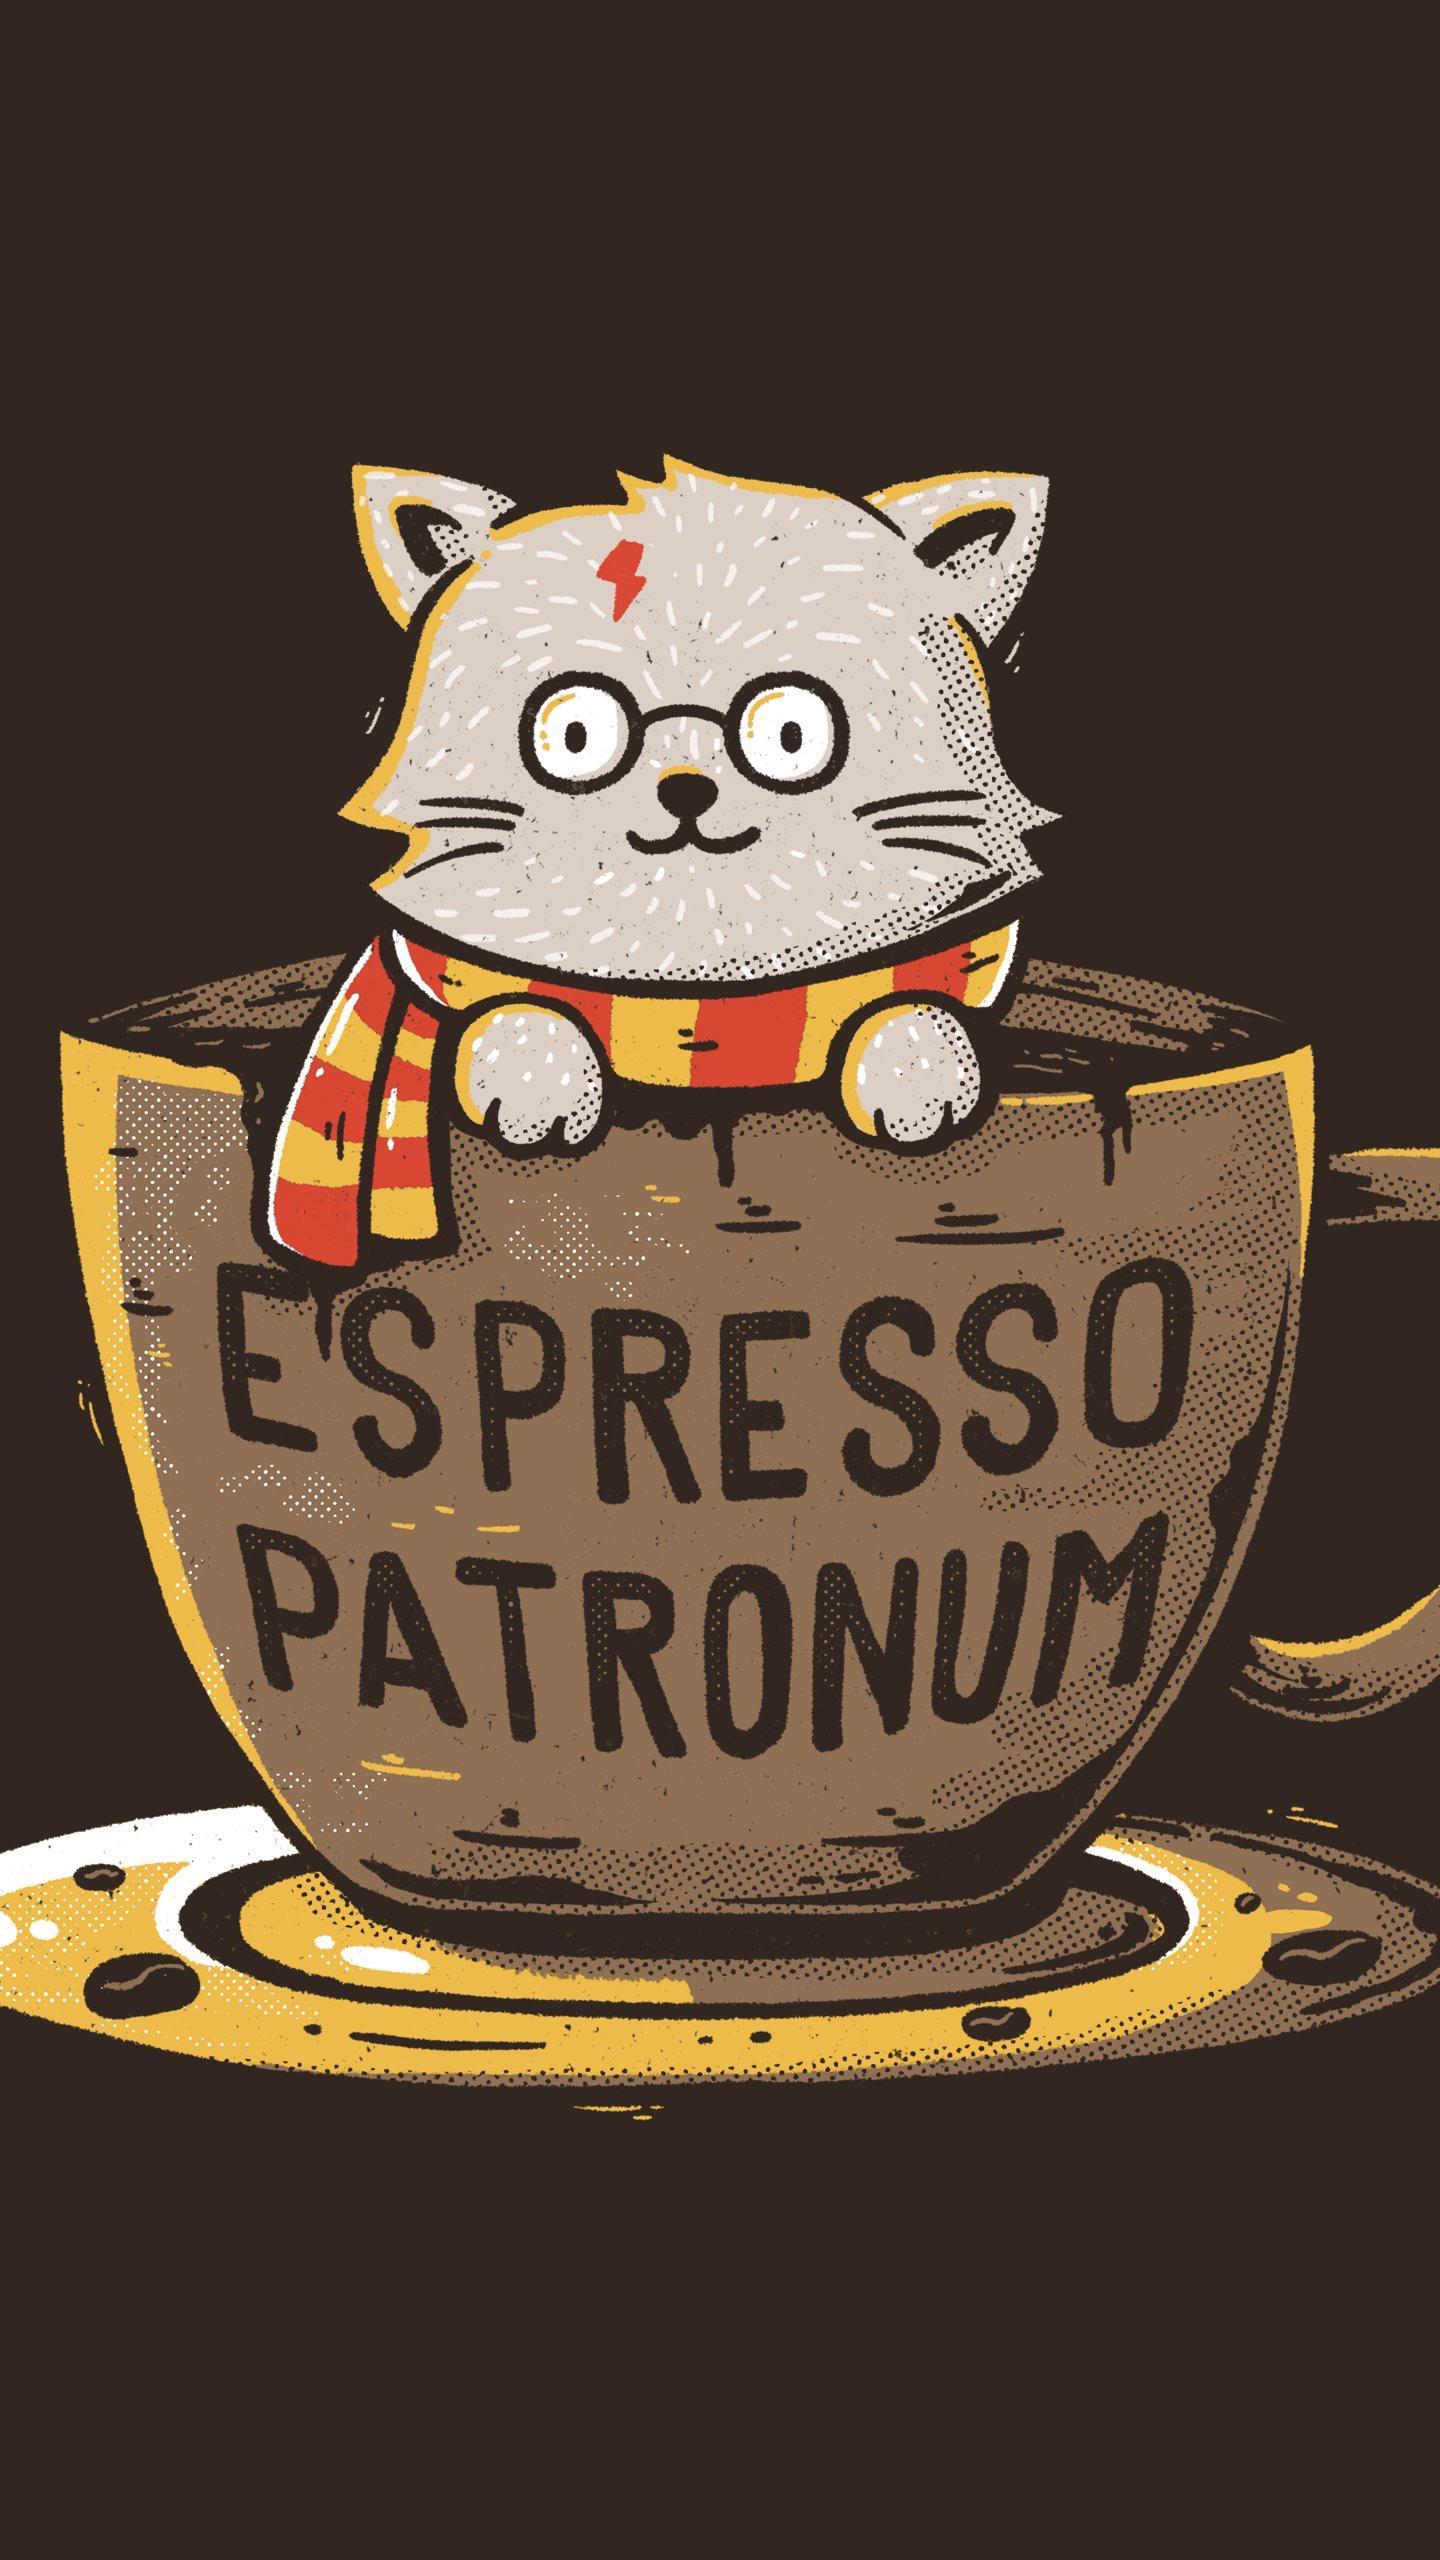 Purry Potter with “Espresso Patronum” spell on cup Wallpaper